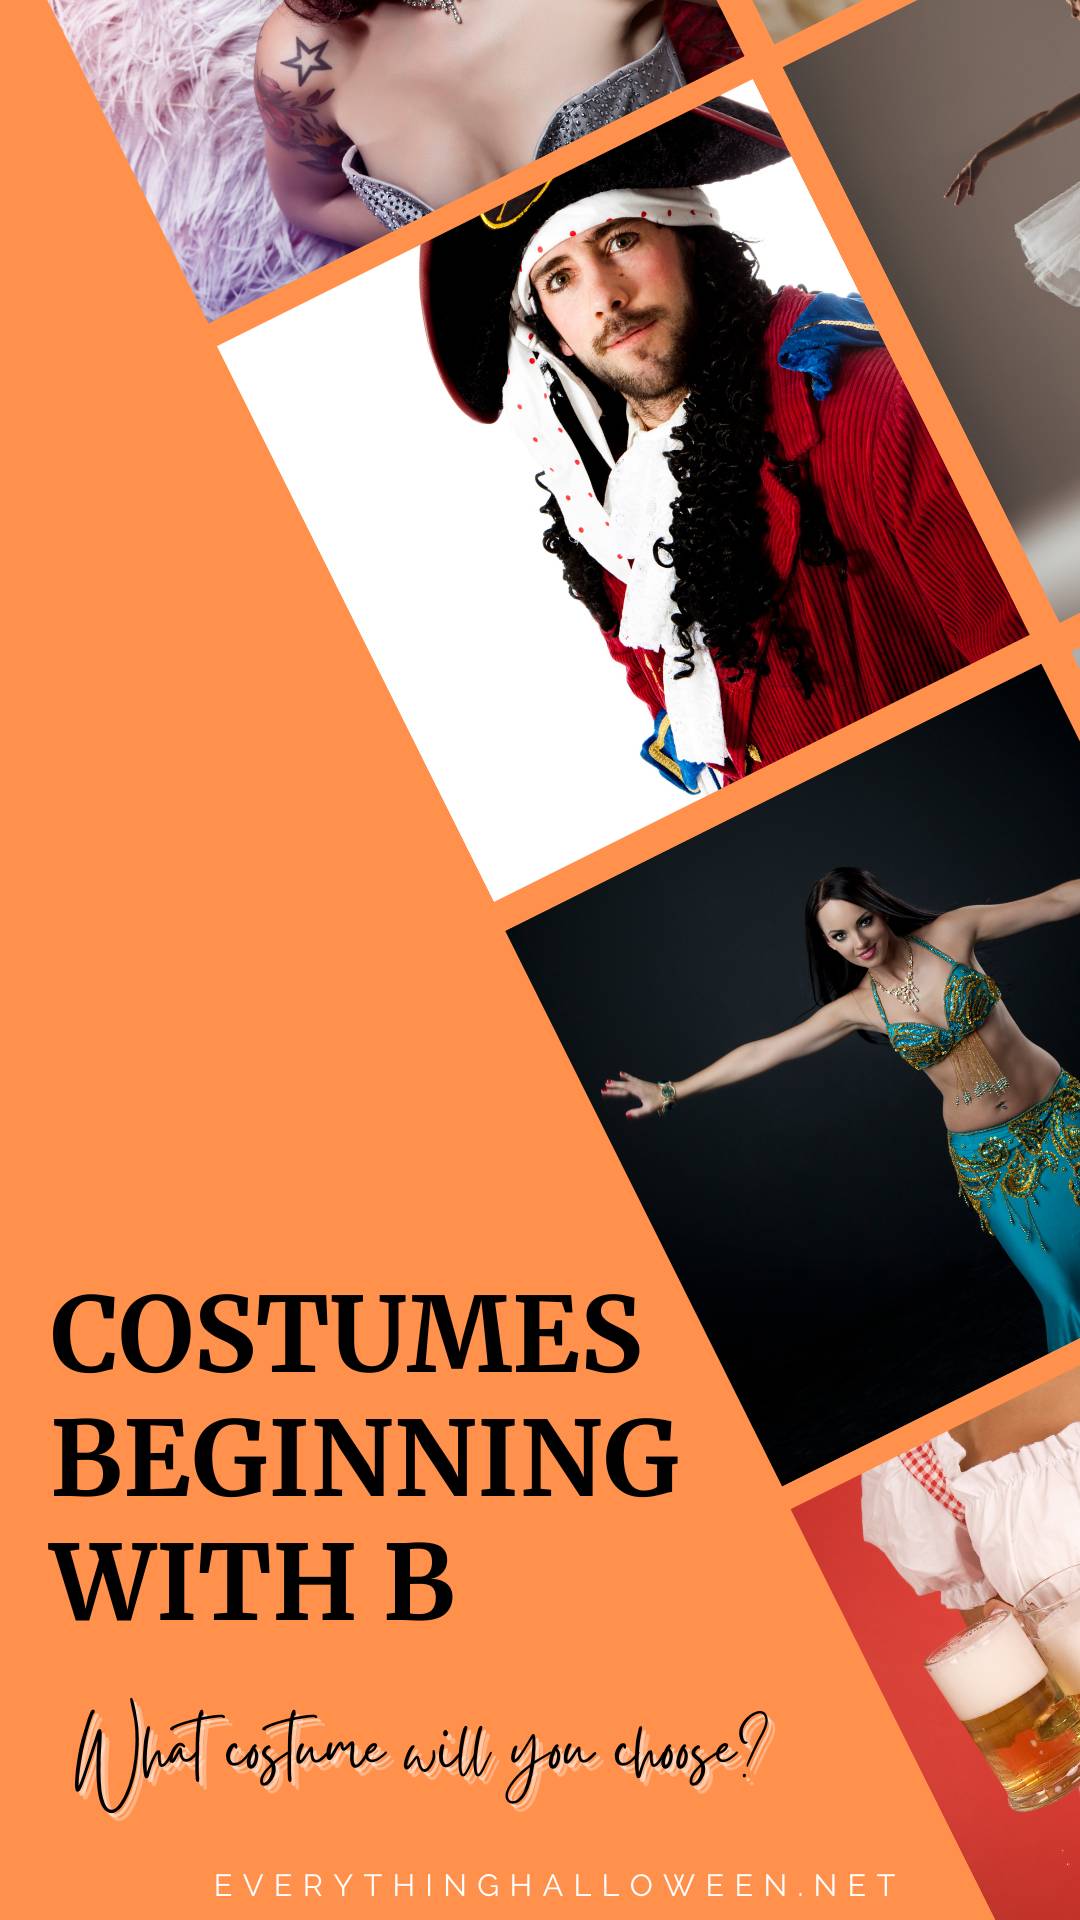 Some fantastic costume ideas beginning with B from buccaneer to belly dancer